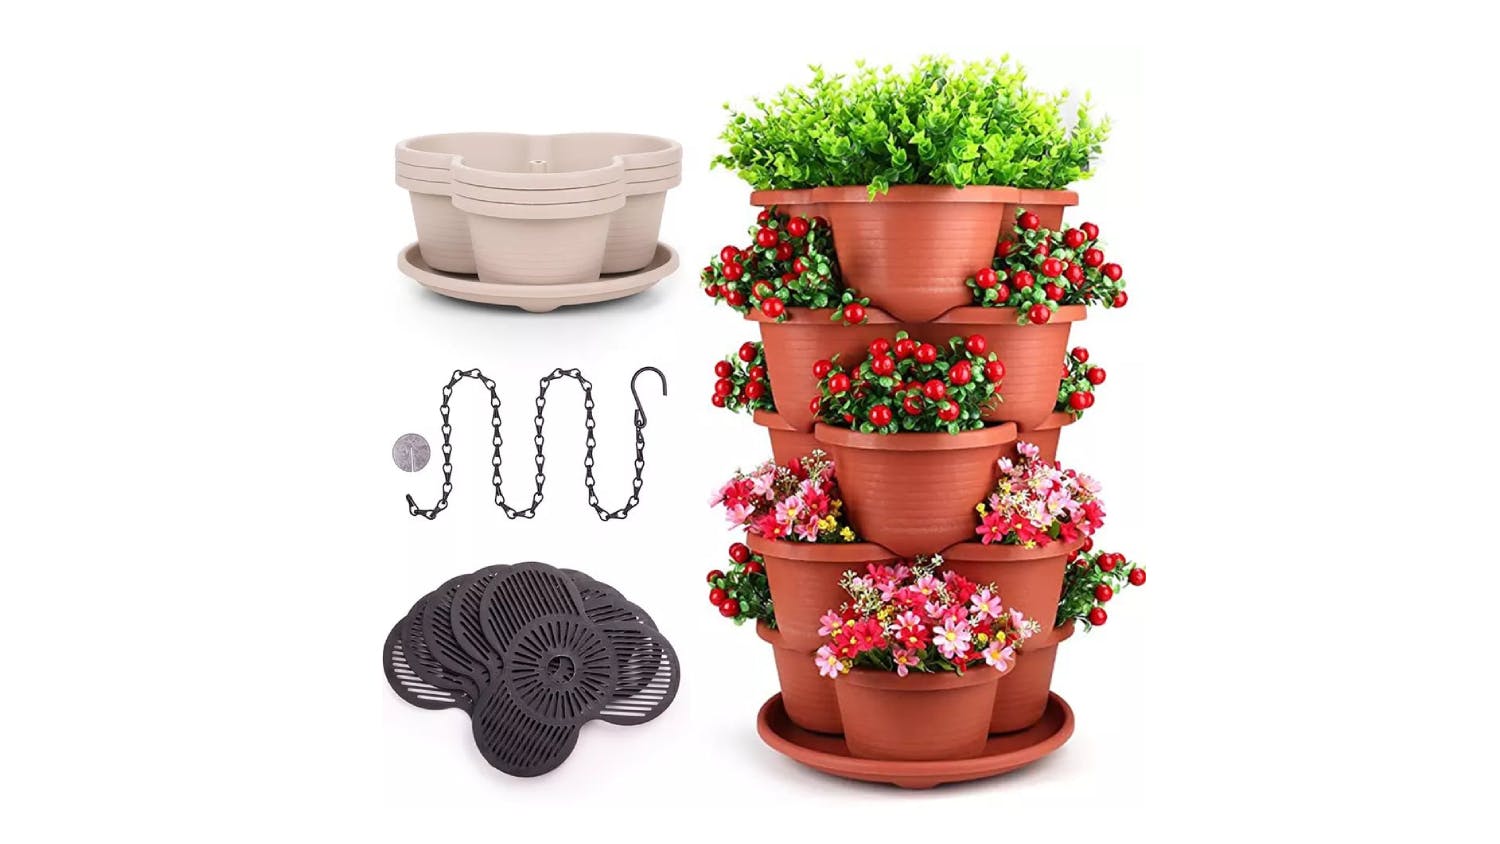 Kmall 3-Tier Terracotta Planter Pot Stack with Drainage - Terracotta"